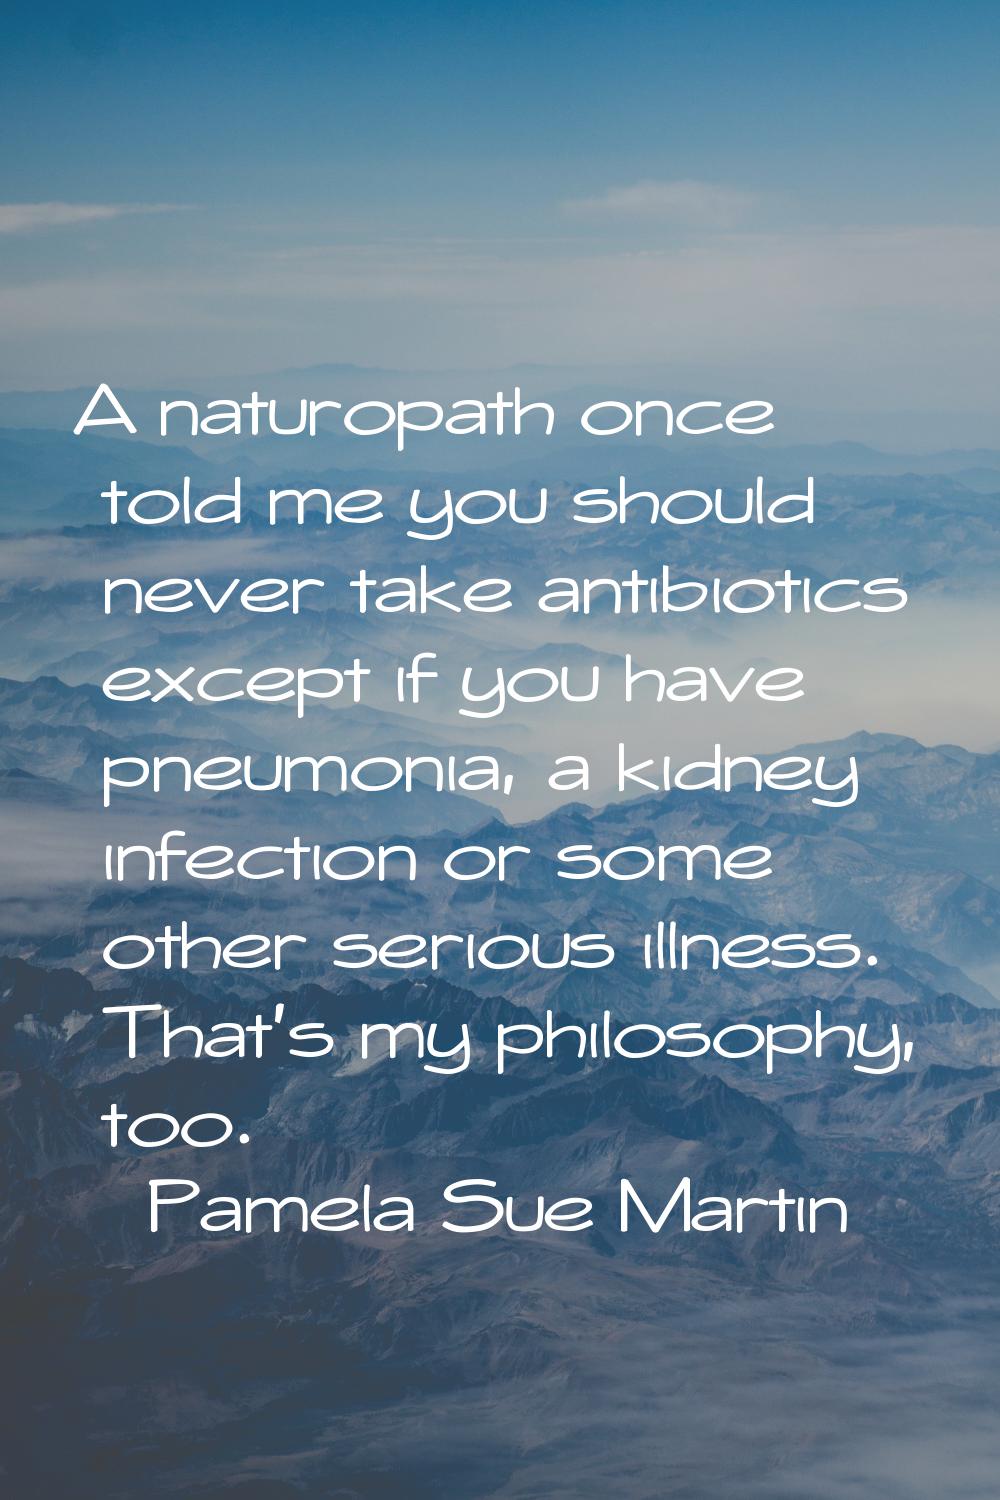 A naturopath once told me you should never take antibiotics except if you have pneumonia, a kidney 